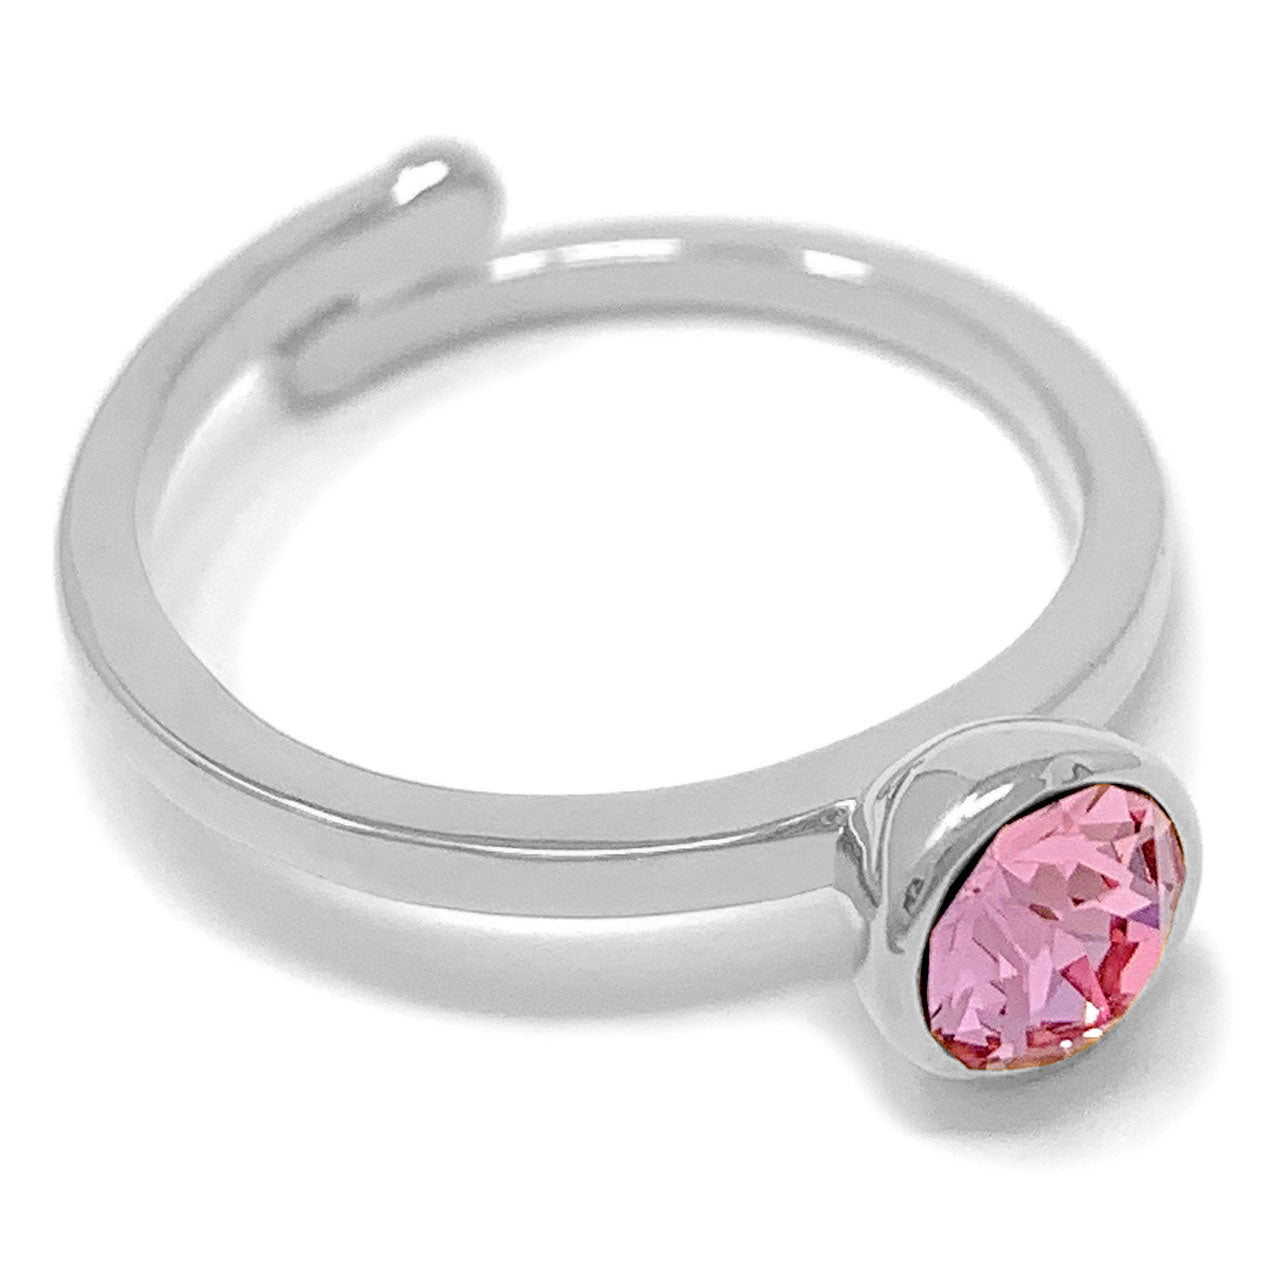 Harley Adjustable Ring with Pink Light Rose Round Crystals from Swarovski Silver Toned Rhodium Plated - Ed Heart